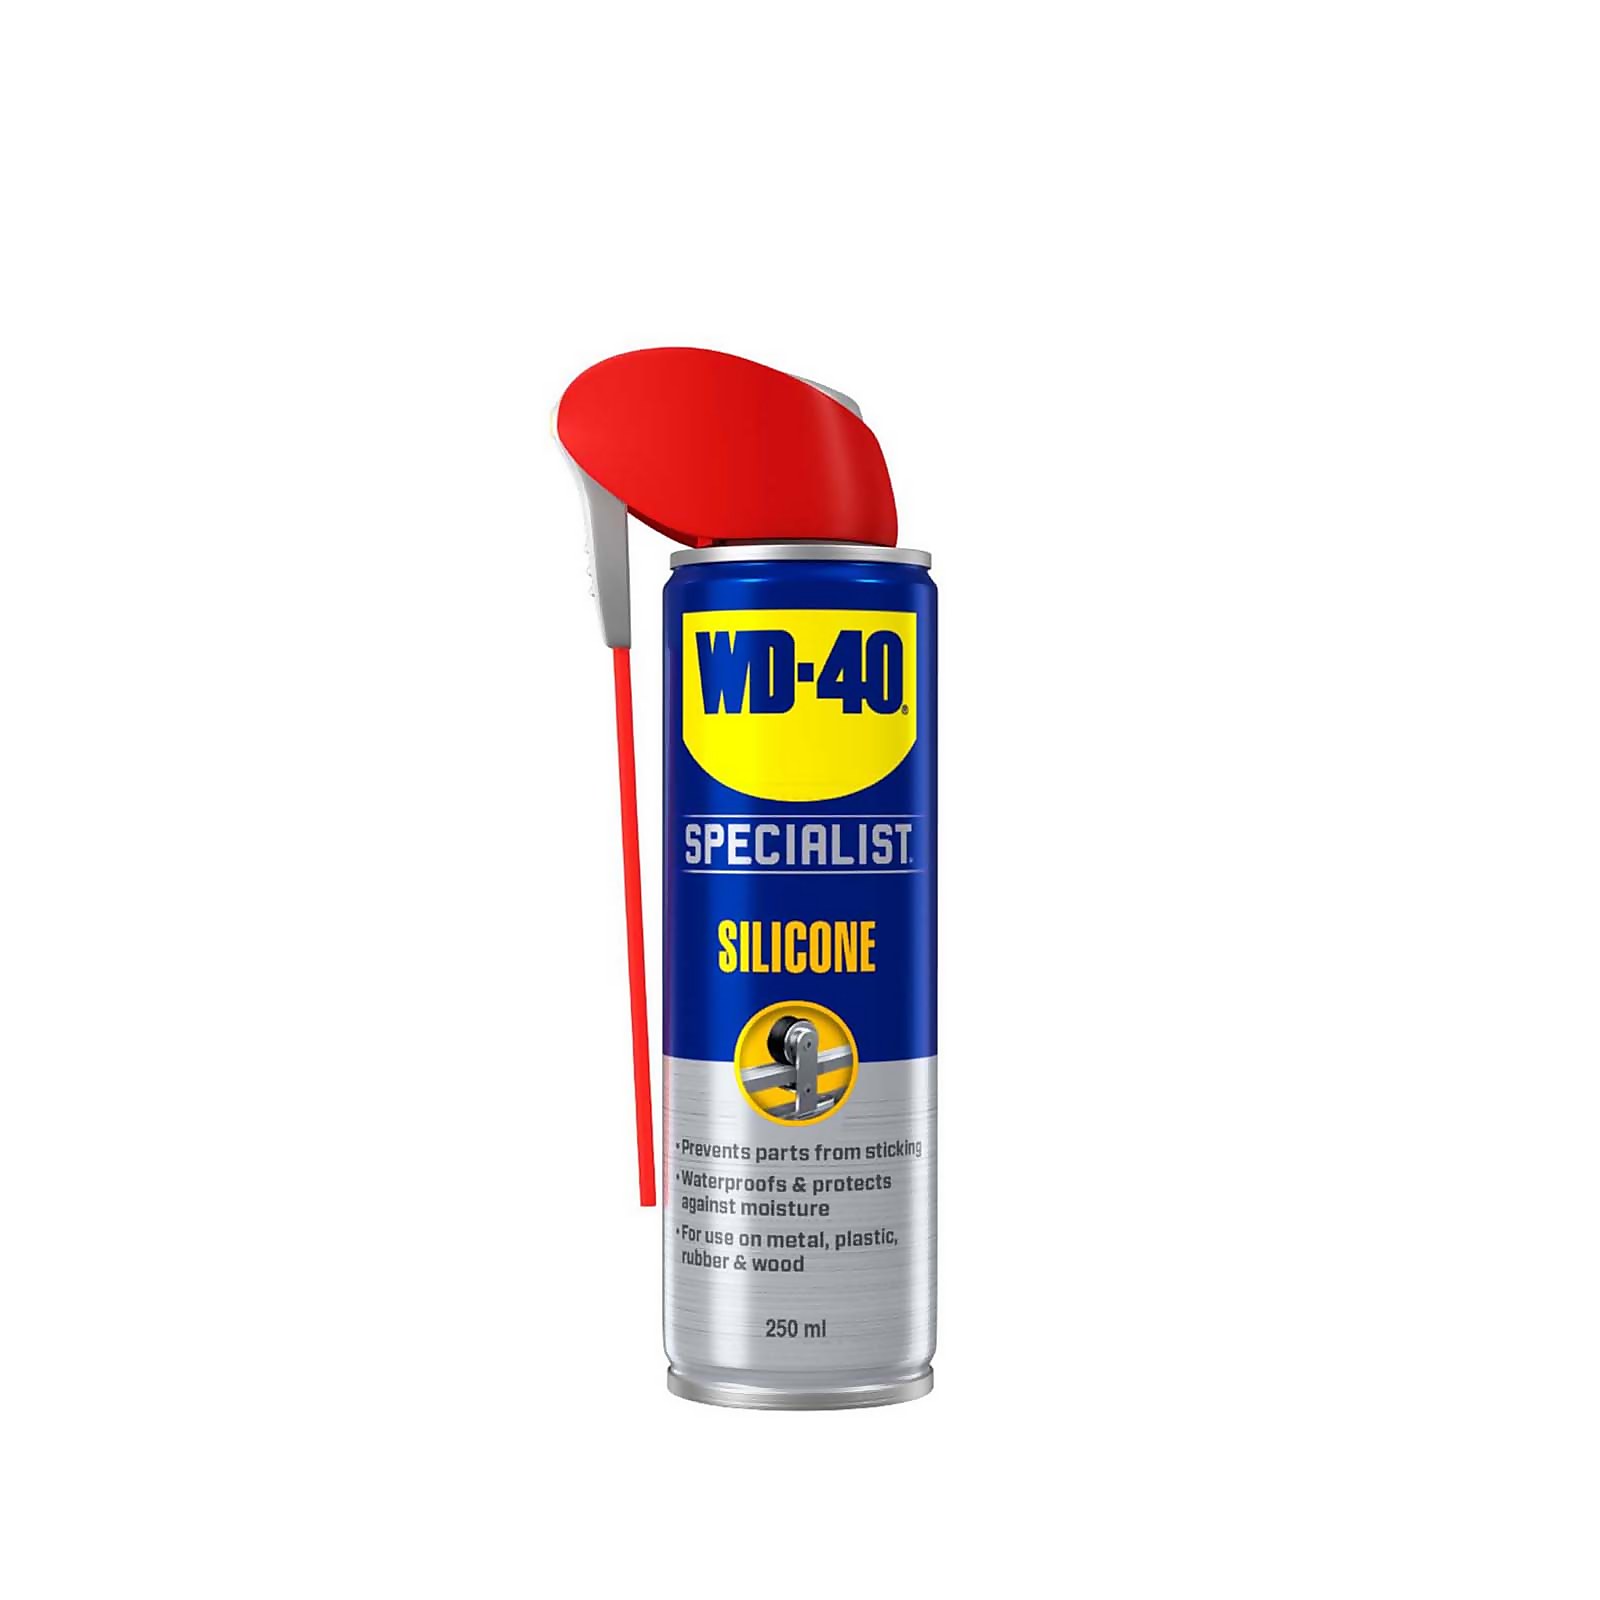 Photo of Wd-40 Specialist High Performance Silicone Lubricant - 250ml